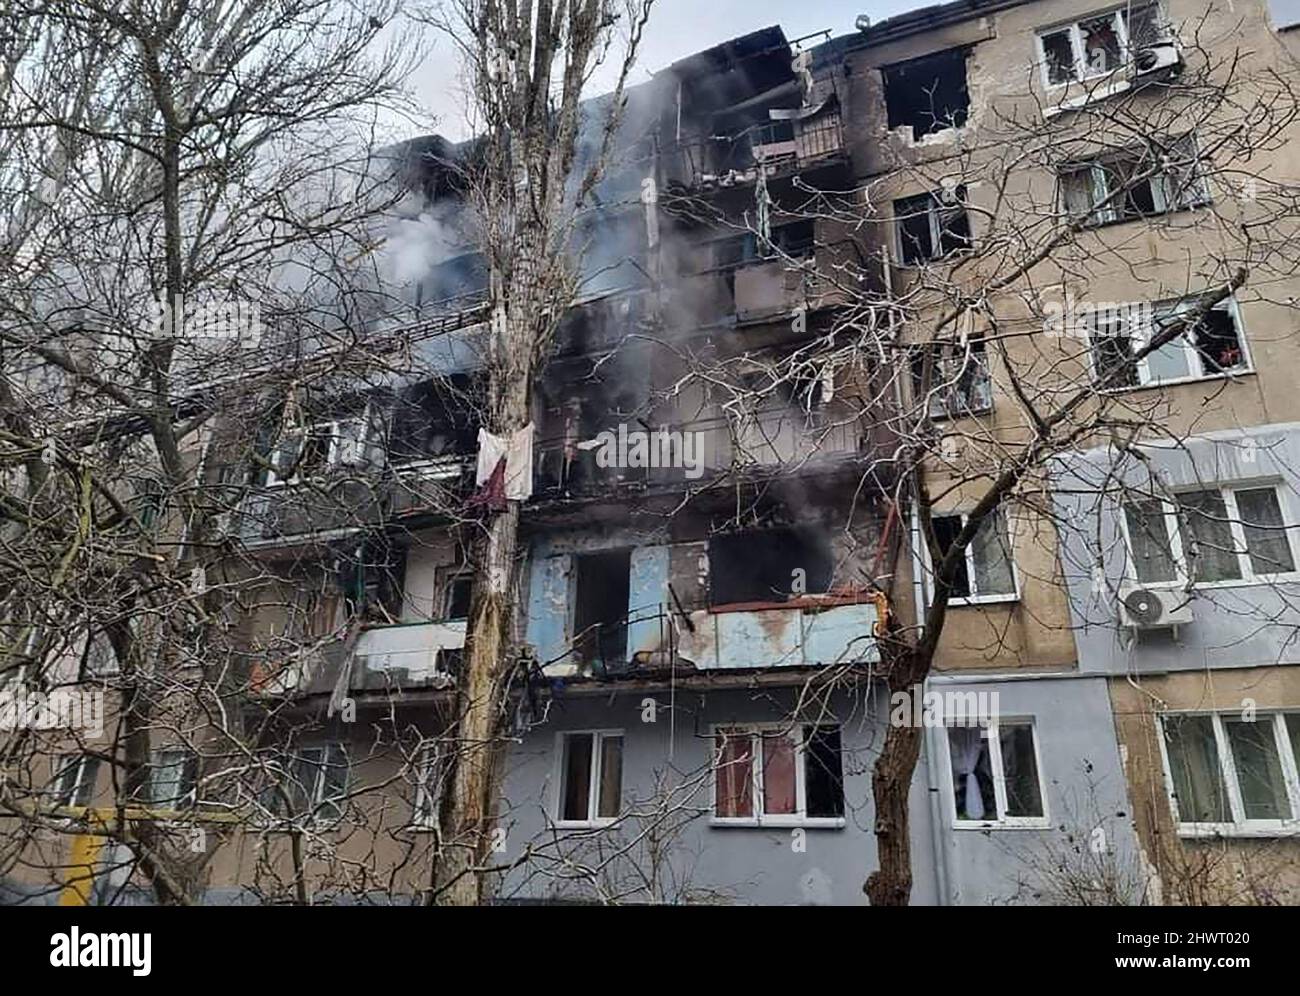 Mykolaiv, Ukraine. 07th Mar, 2022. Firefighters extinguish a fire in a damaged residential building after Russia shelled the area in the southern city of Mykolaiv in Ukraine on Monday, March 7, 2022. Ukraine's military says it is fighting 'fierce battles' with Russian forces on the edge of Mykolaiv, which controls the road to the key Black Sea city of Odessa in the west. Photo by Ukrainian State Emergency Service/UPI Credit: UPI/Alamy Live News Stock Photo